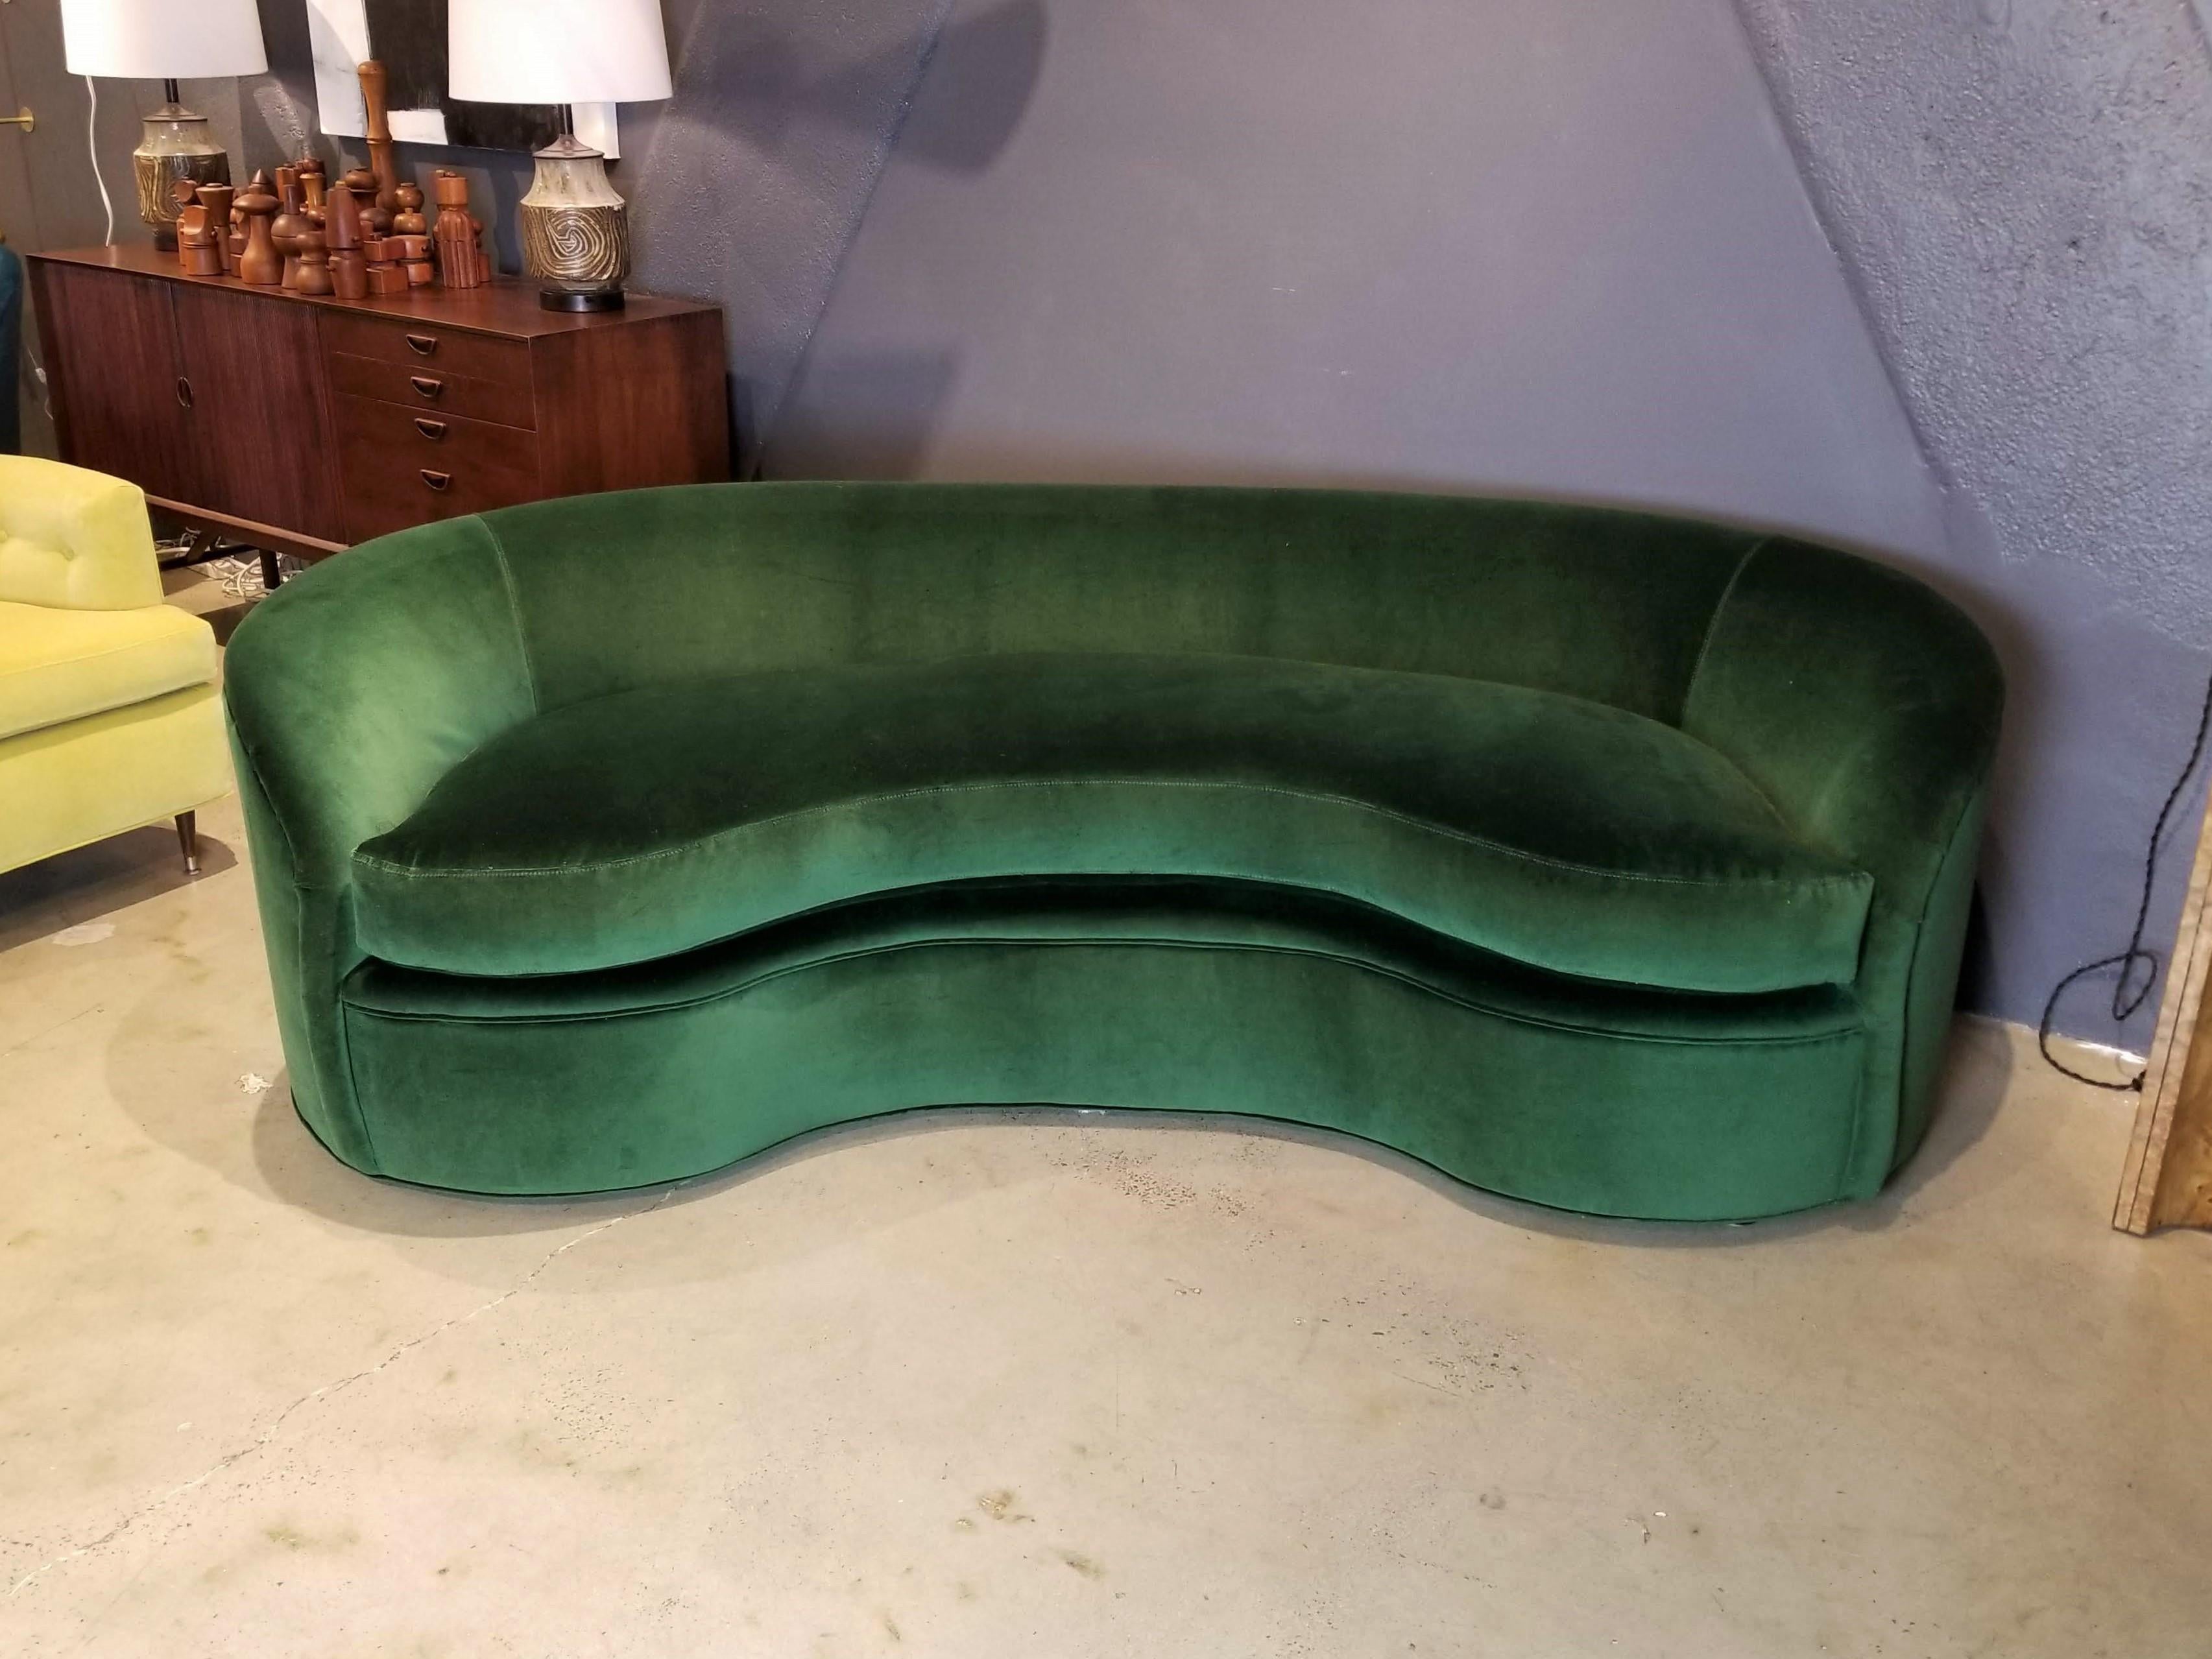 Classic biomorphic kidney bean shaped curved sofa made by Directional Furniture. Pristine, like-new condition--fully restored with all new foam and a luxe cotton blend rich emerald green velvet. 

This piece is viewable at our NYC showroom in